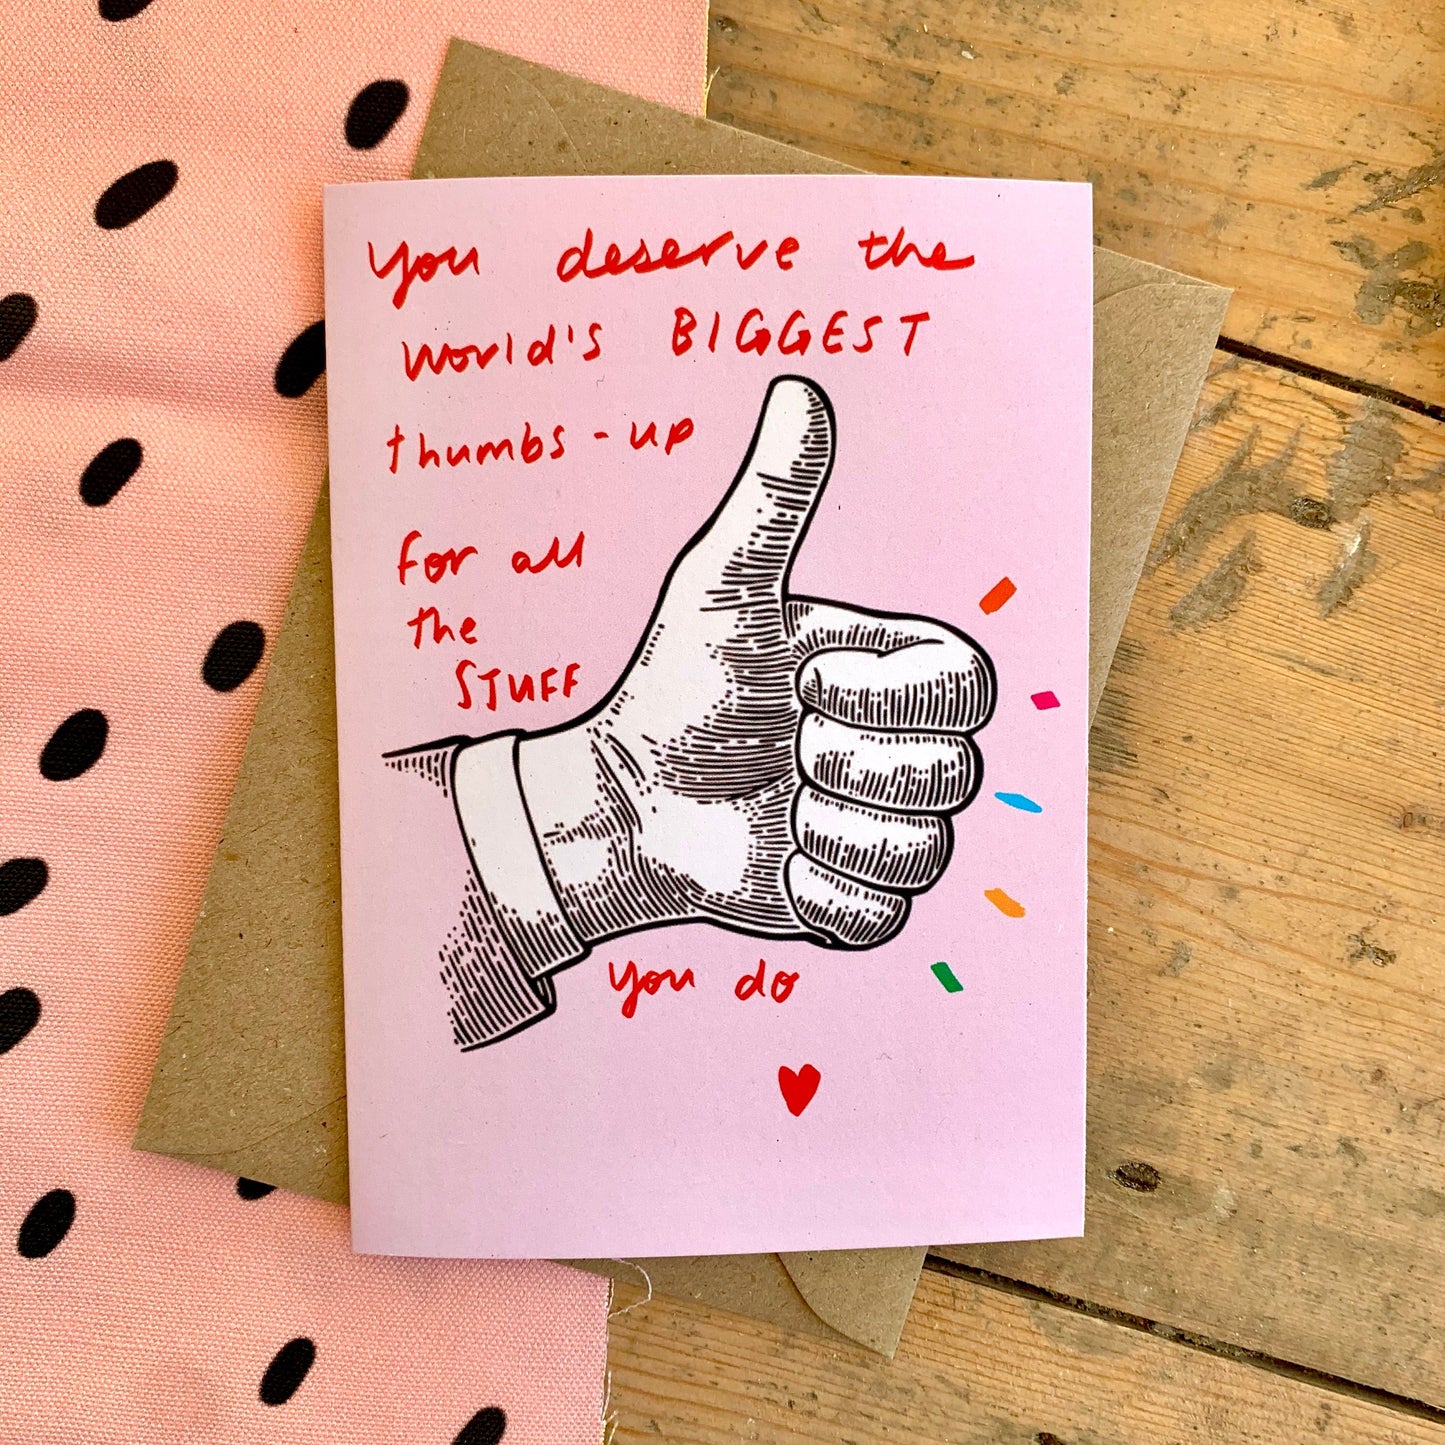 Biggest thumbs up card